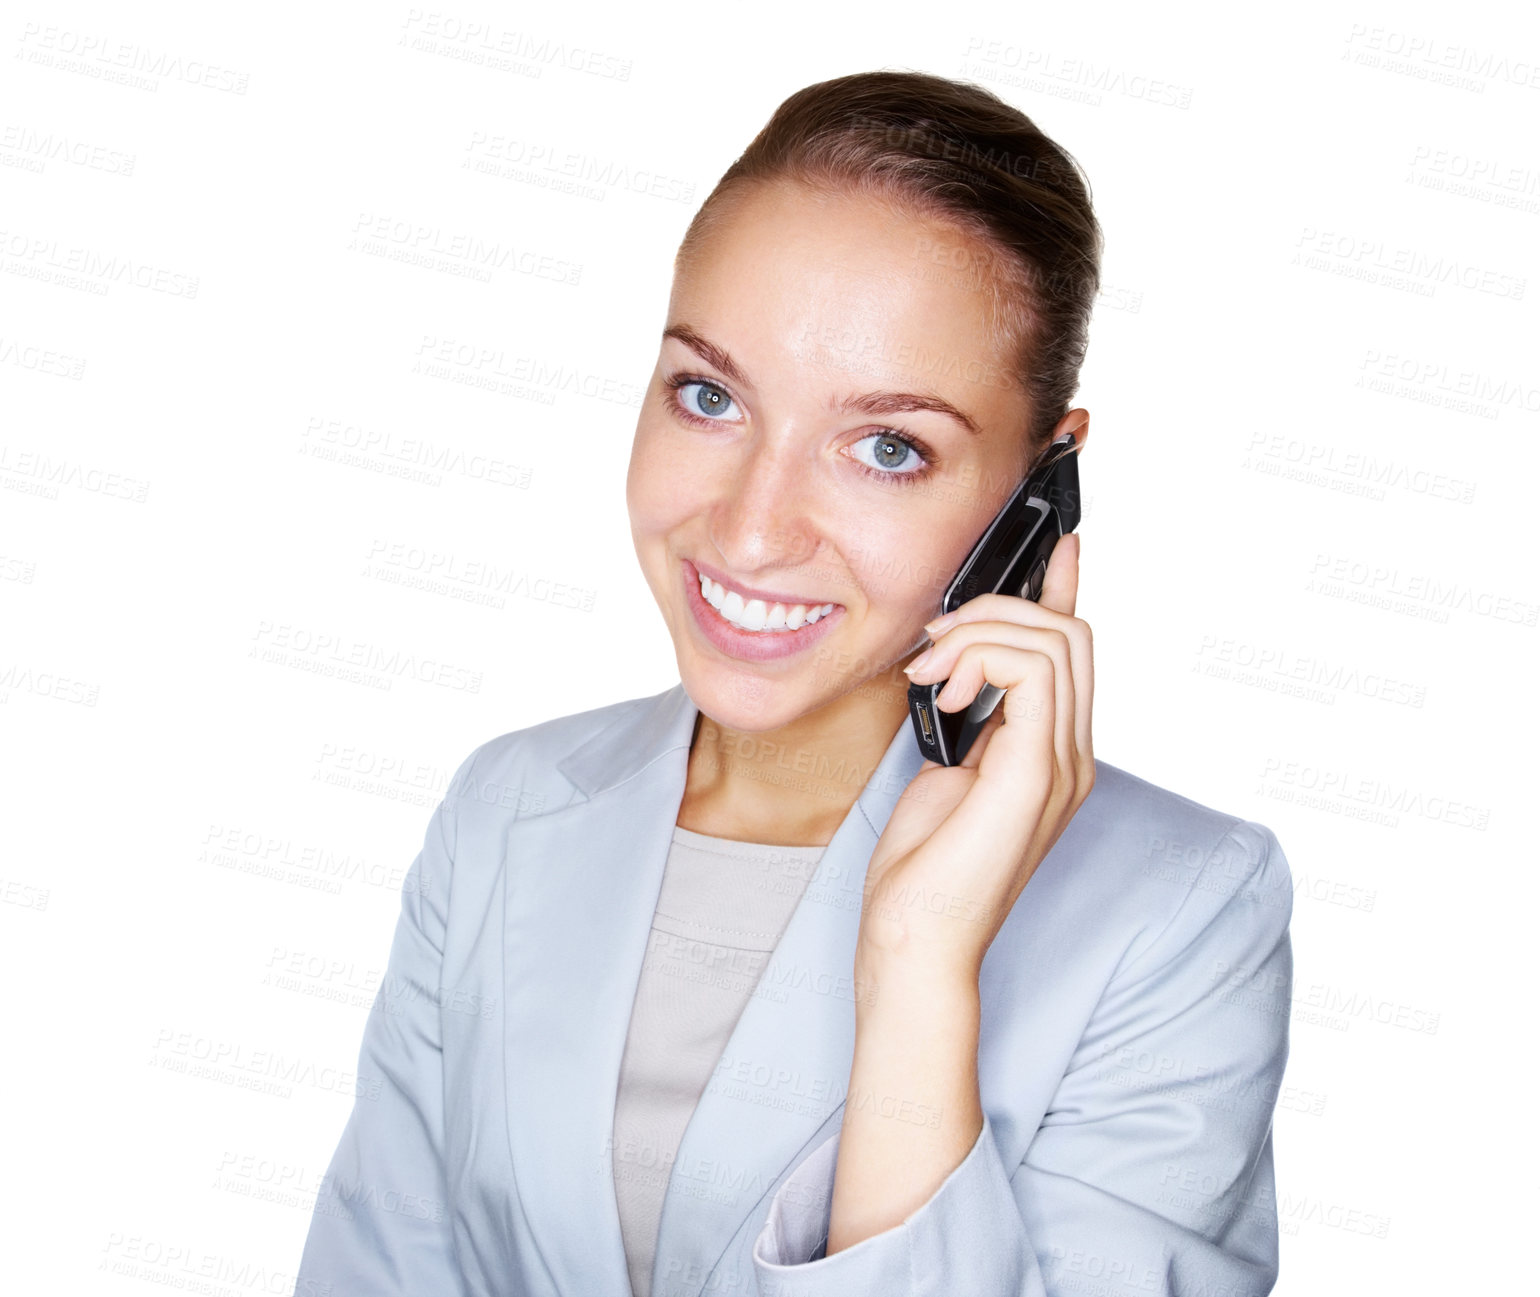 Buy stock photo Portrait of a smiling young business woman speaking over the cellphone against white